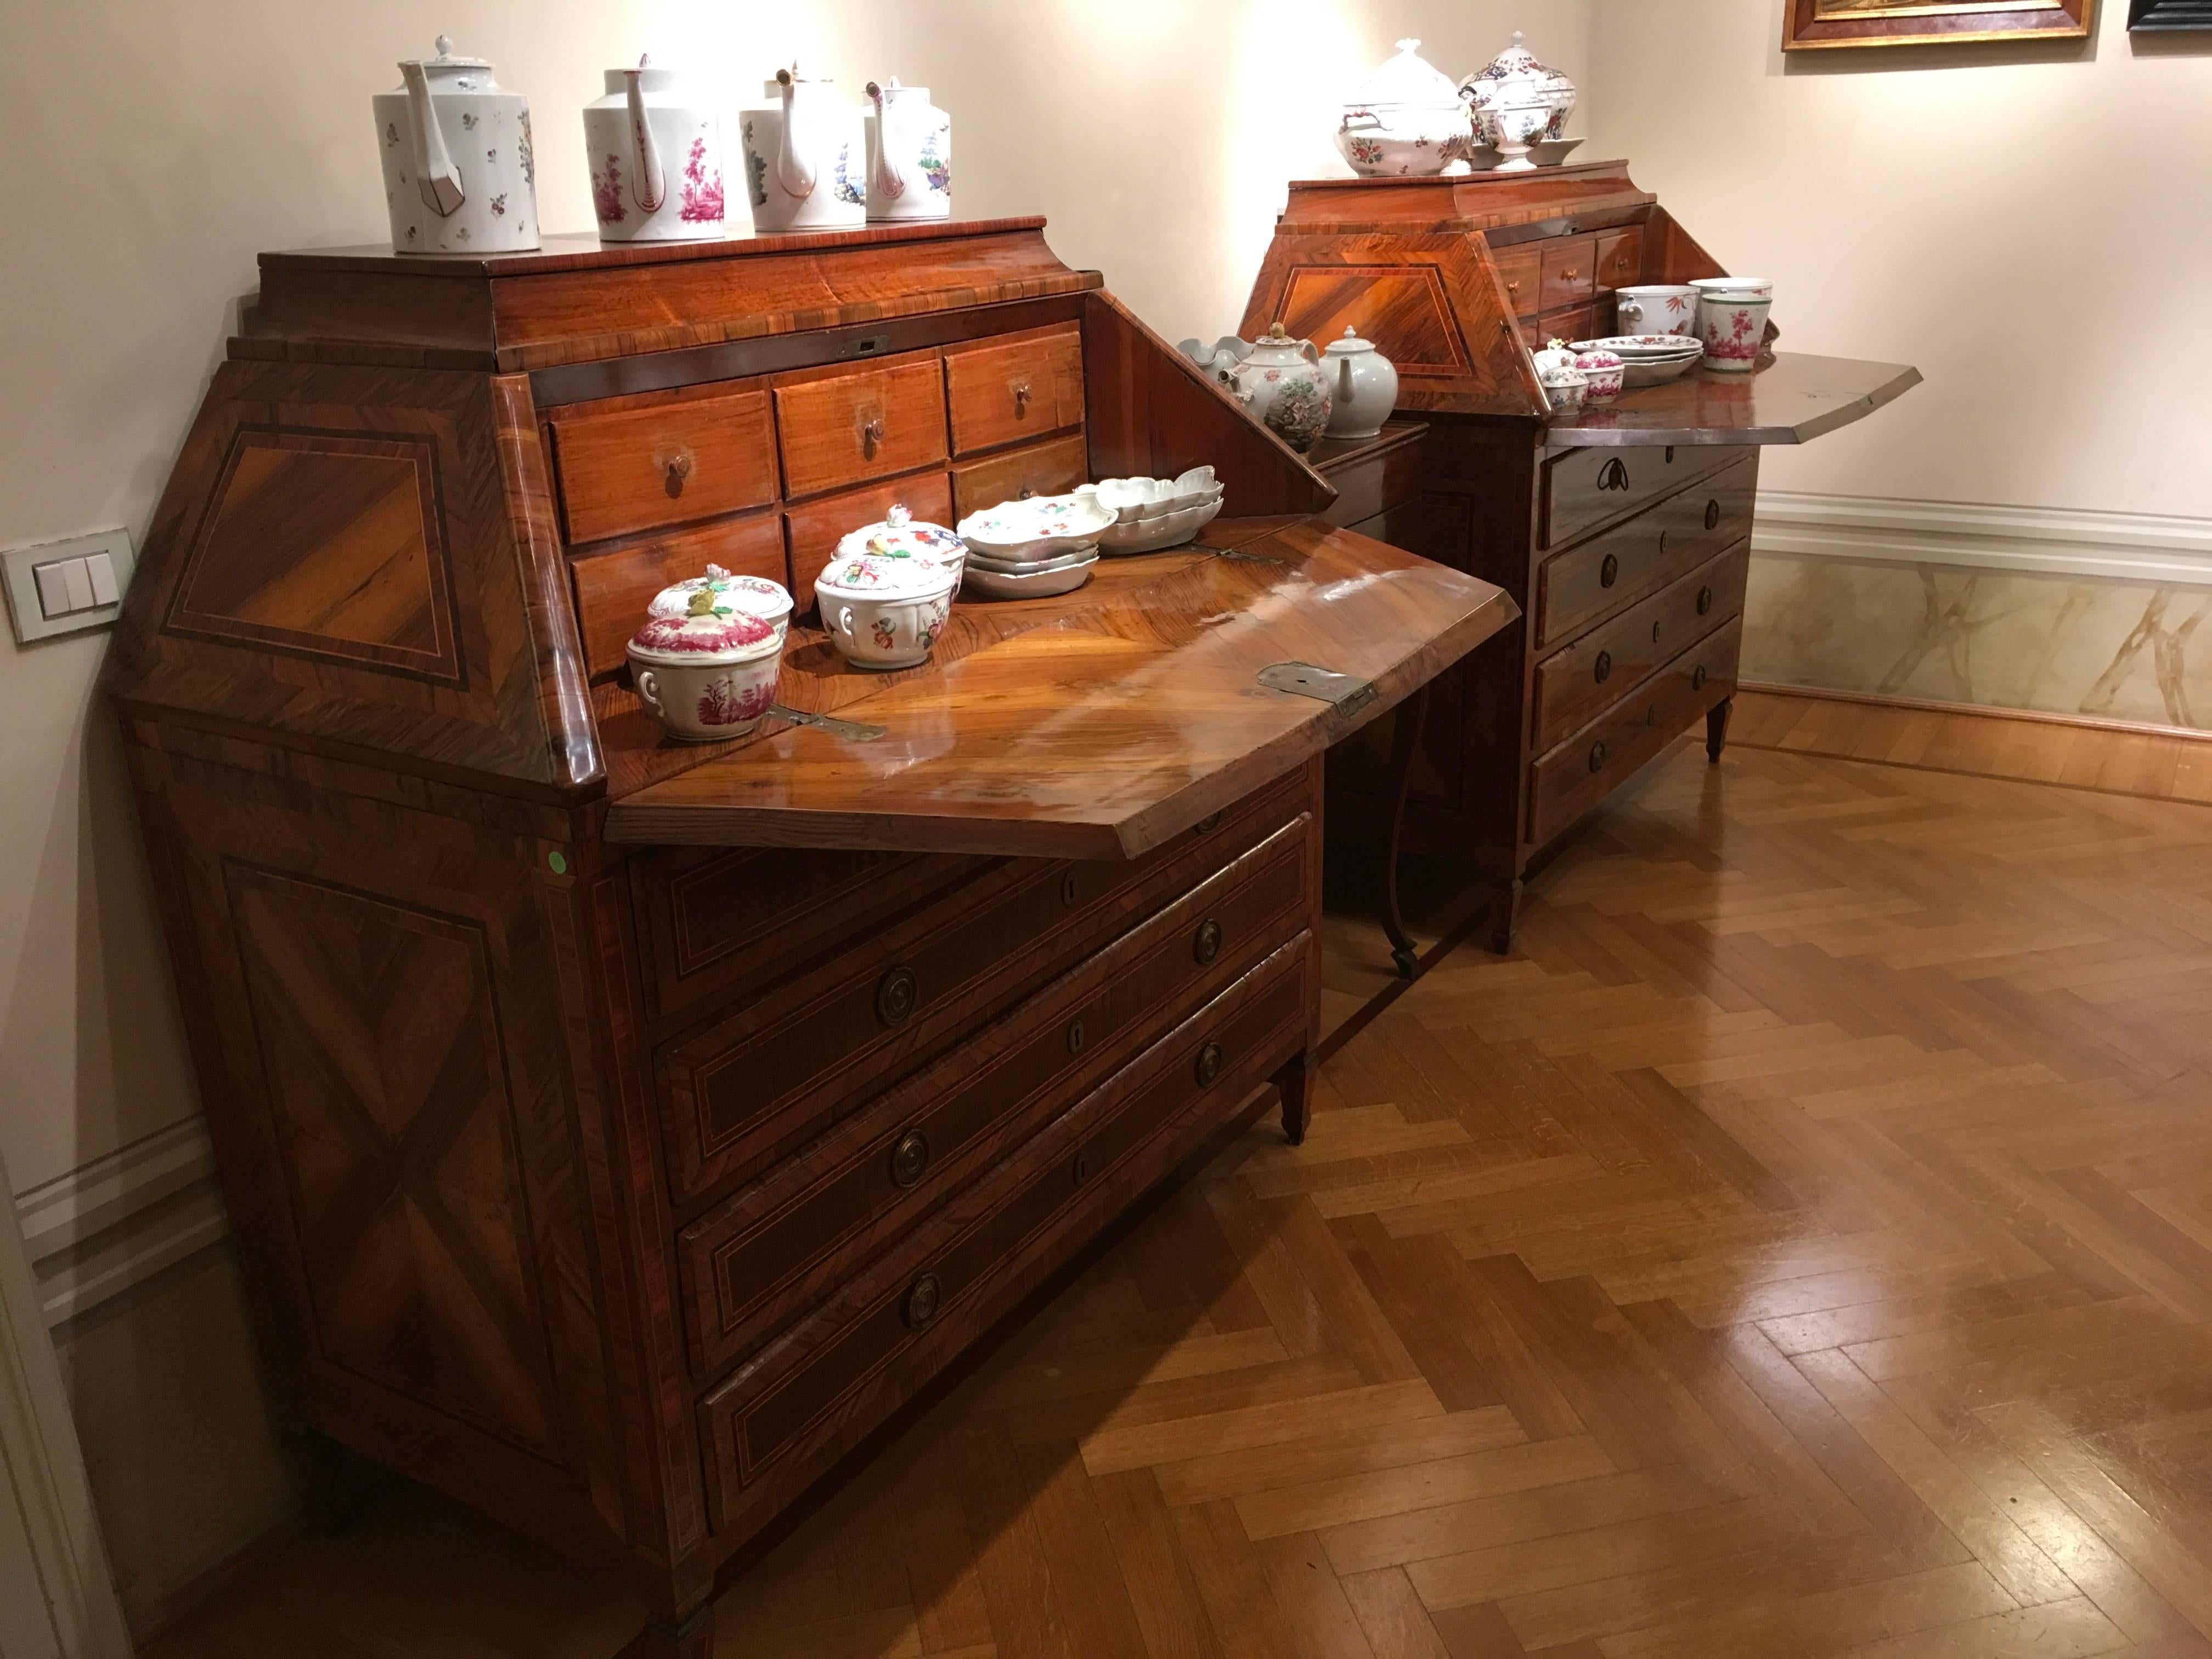 Italian inlaid mahogany and walnut chest of drawers with secretaire.
The Italian exquisite craftsmanship finds in this piece one of the best expressions.

Every parts of this georgeous piece, are finely handcrafted and a series of precious woods are